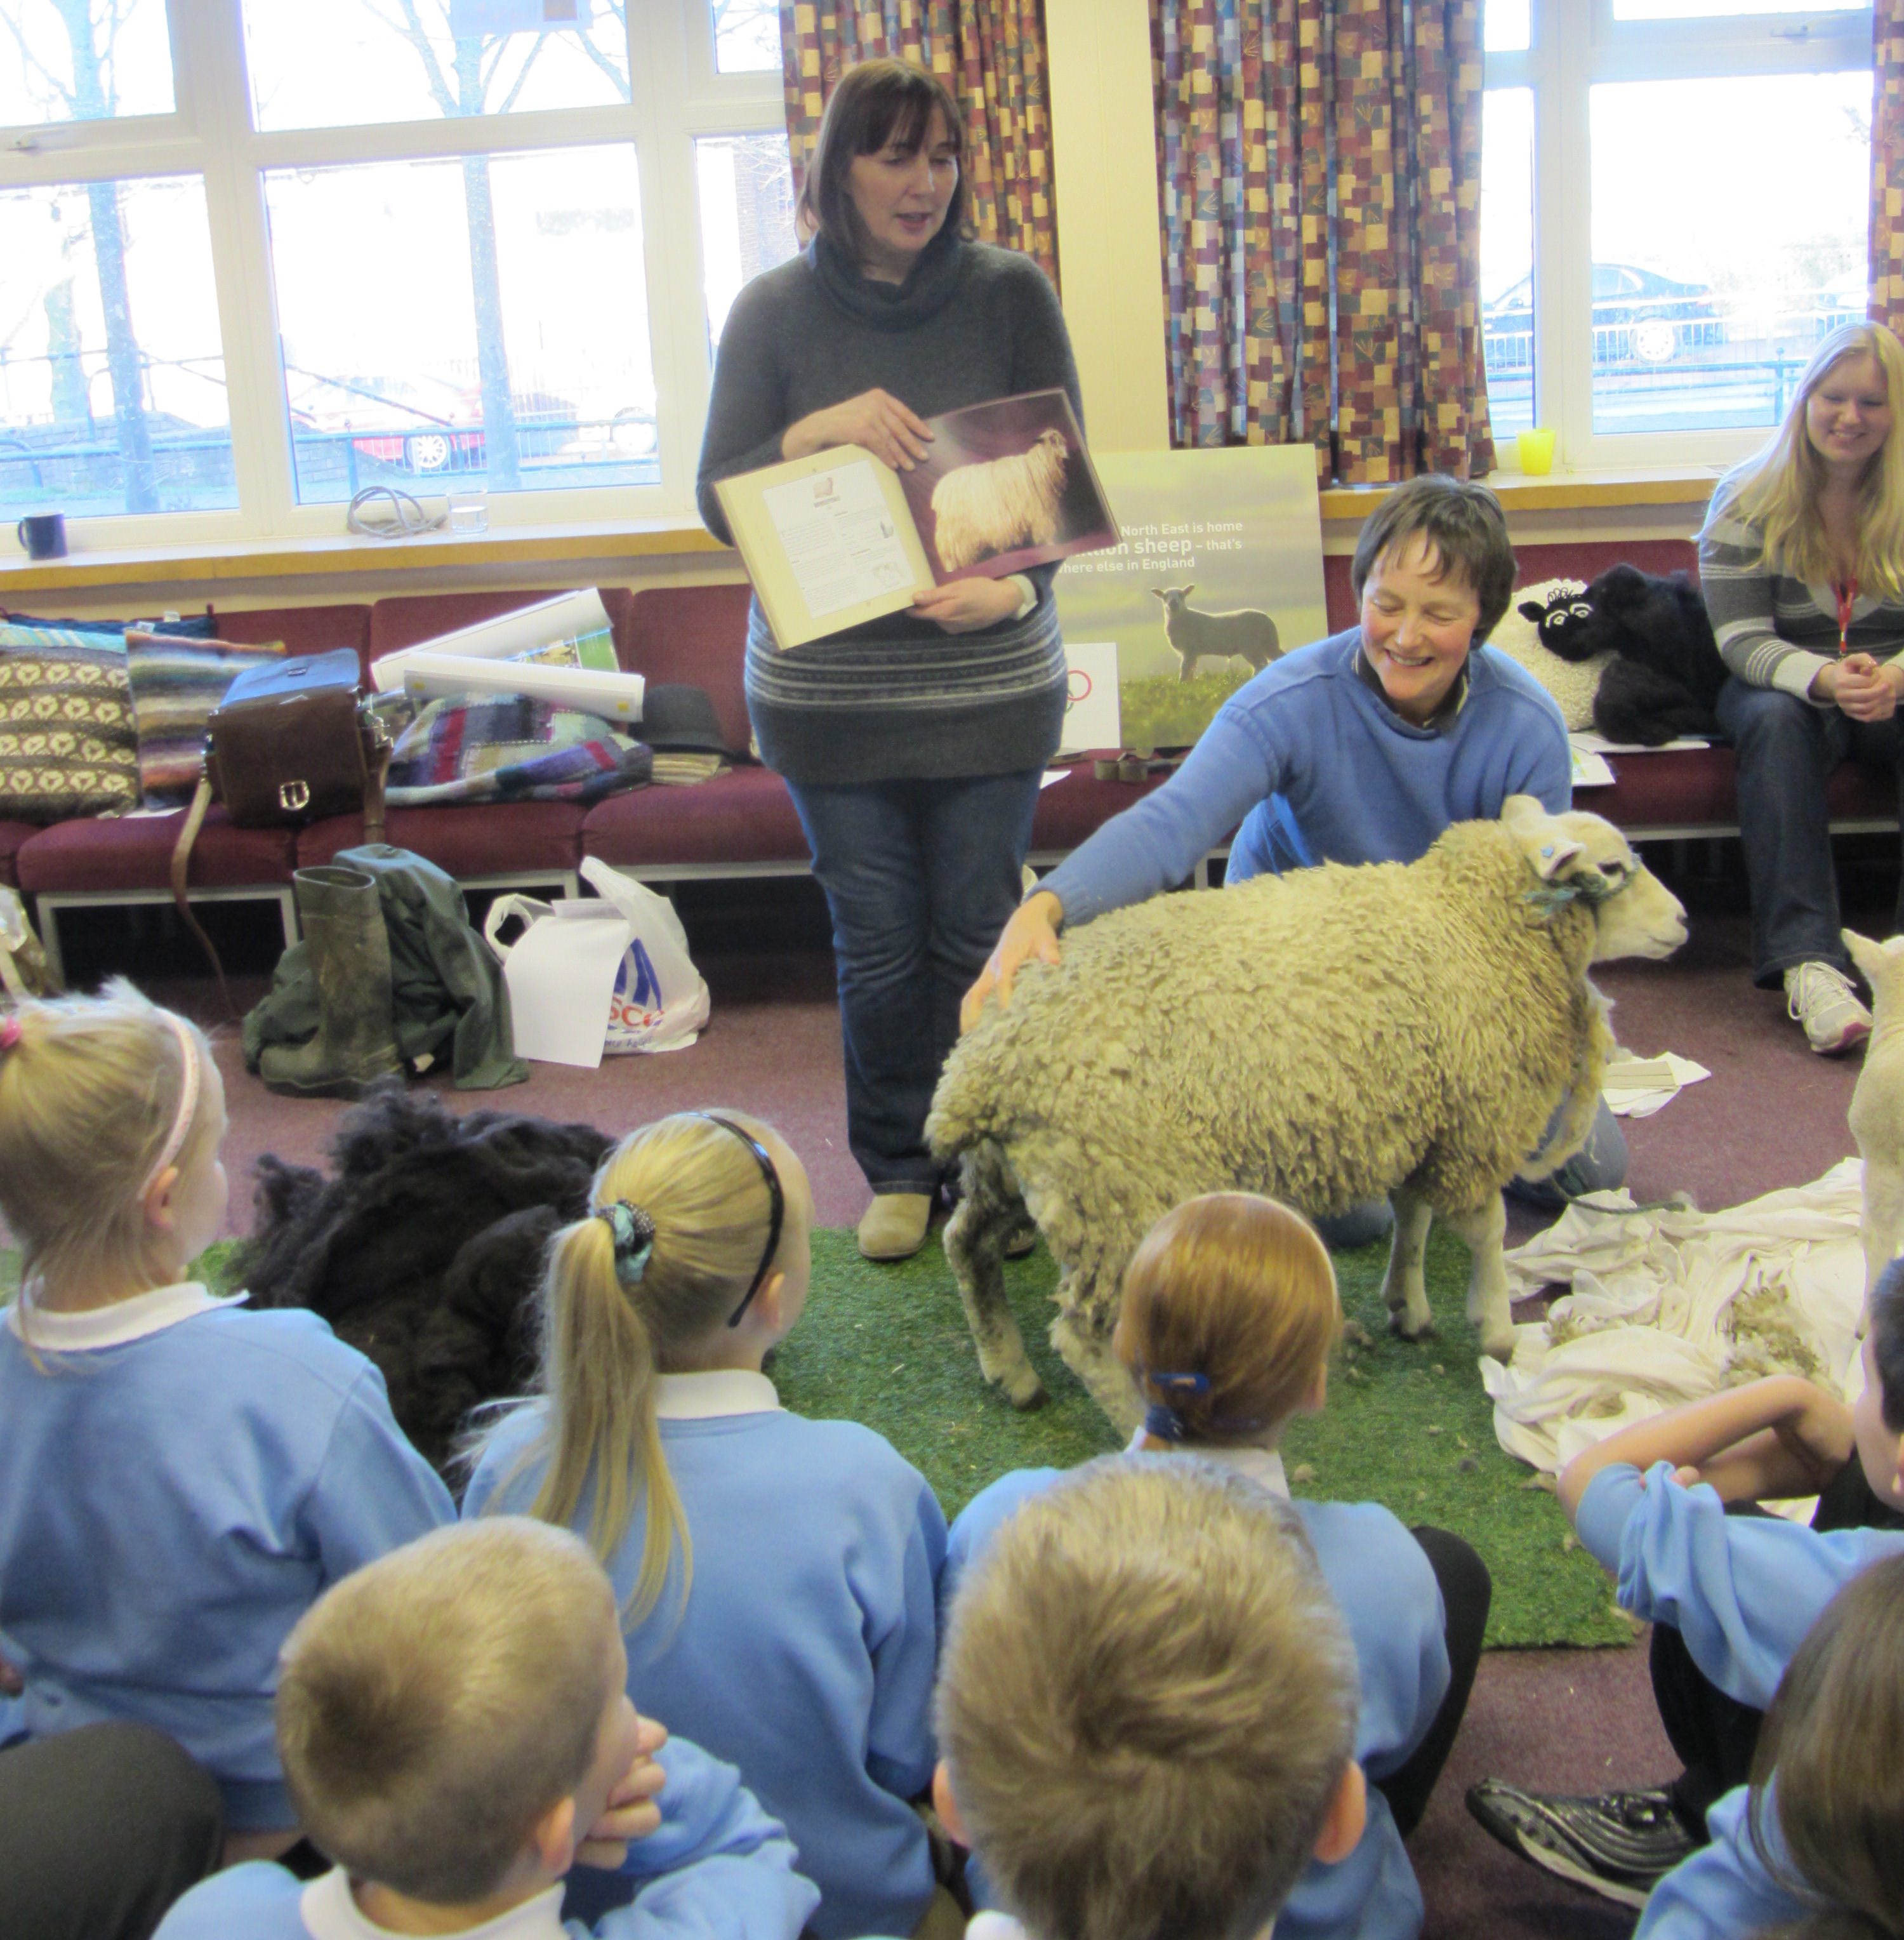 Learning about sheep and wool